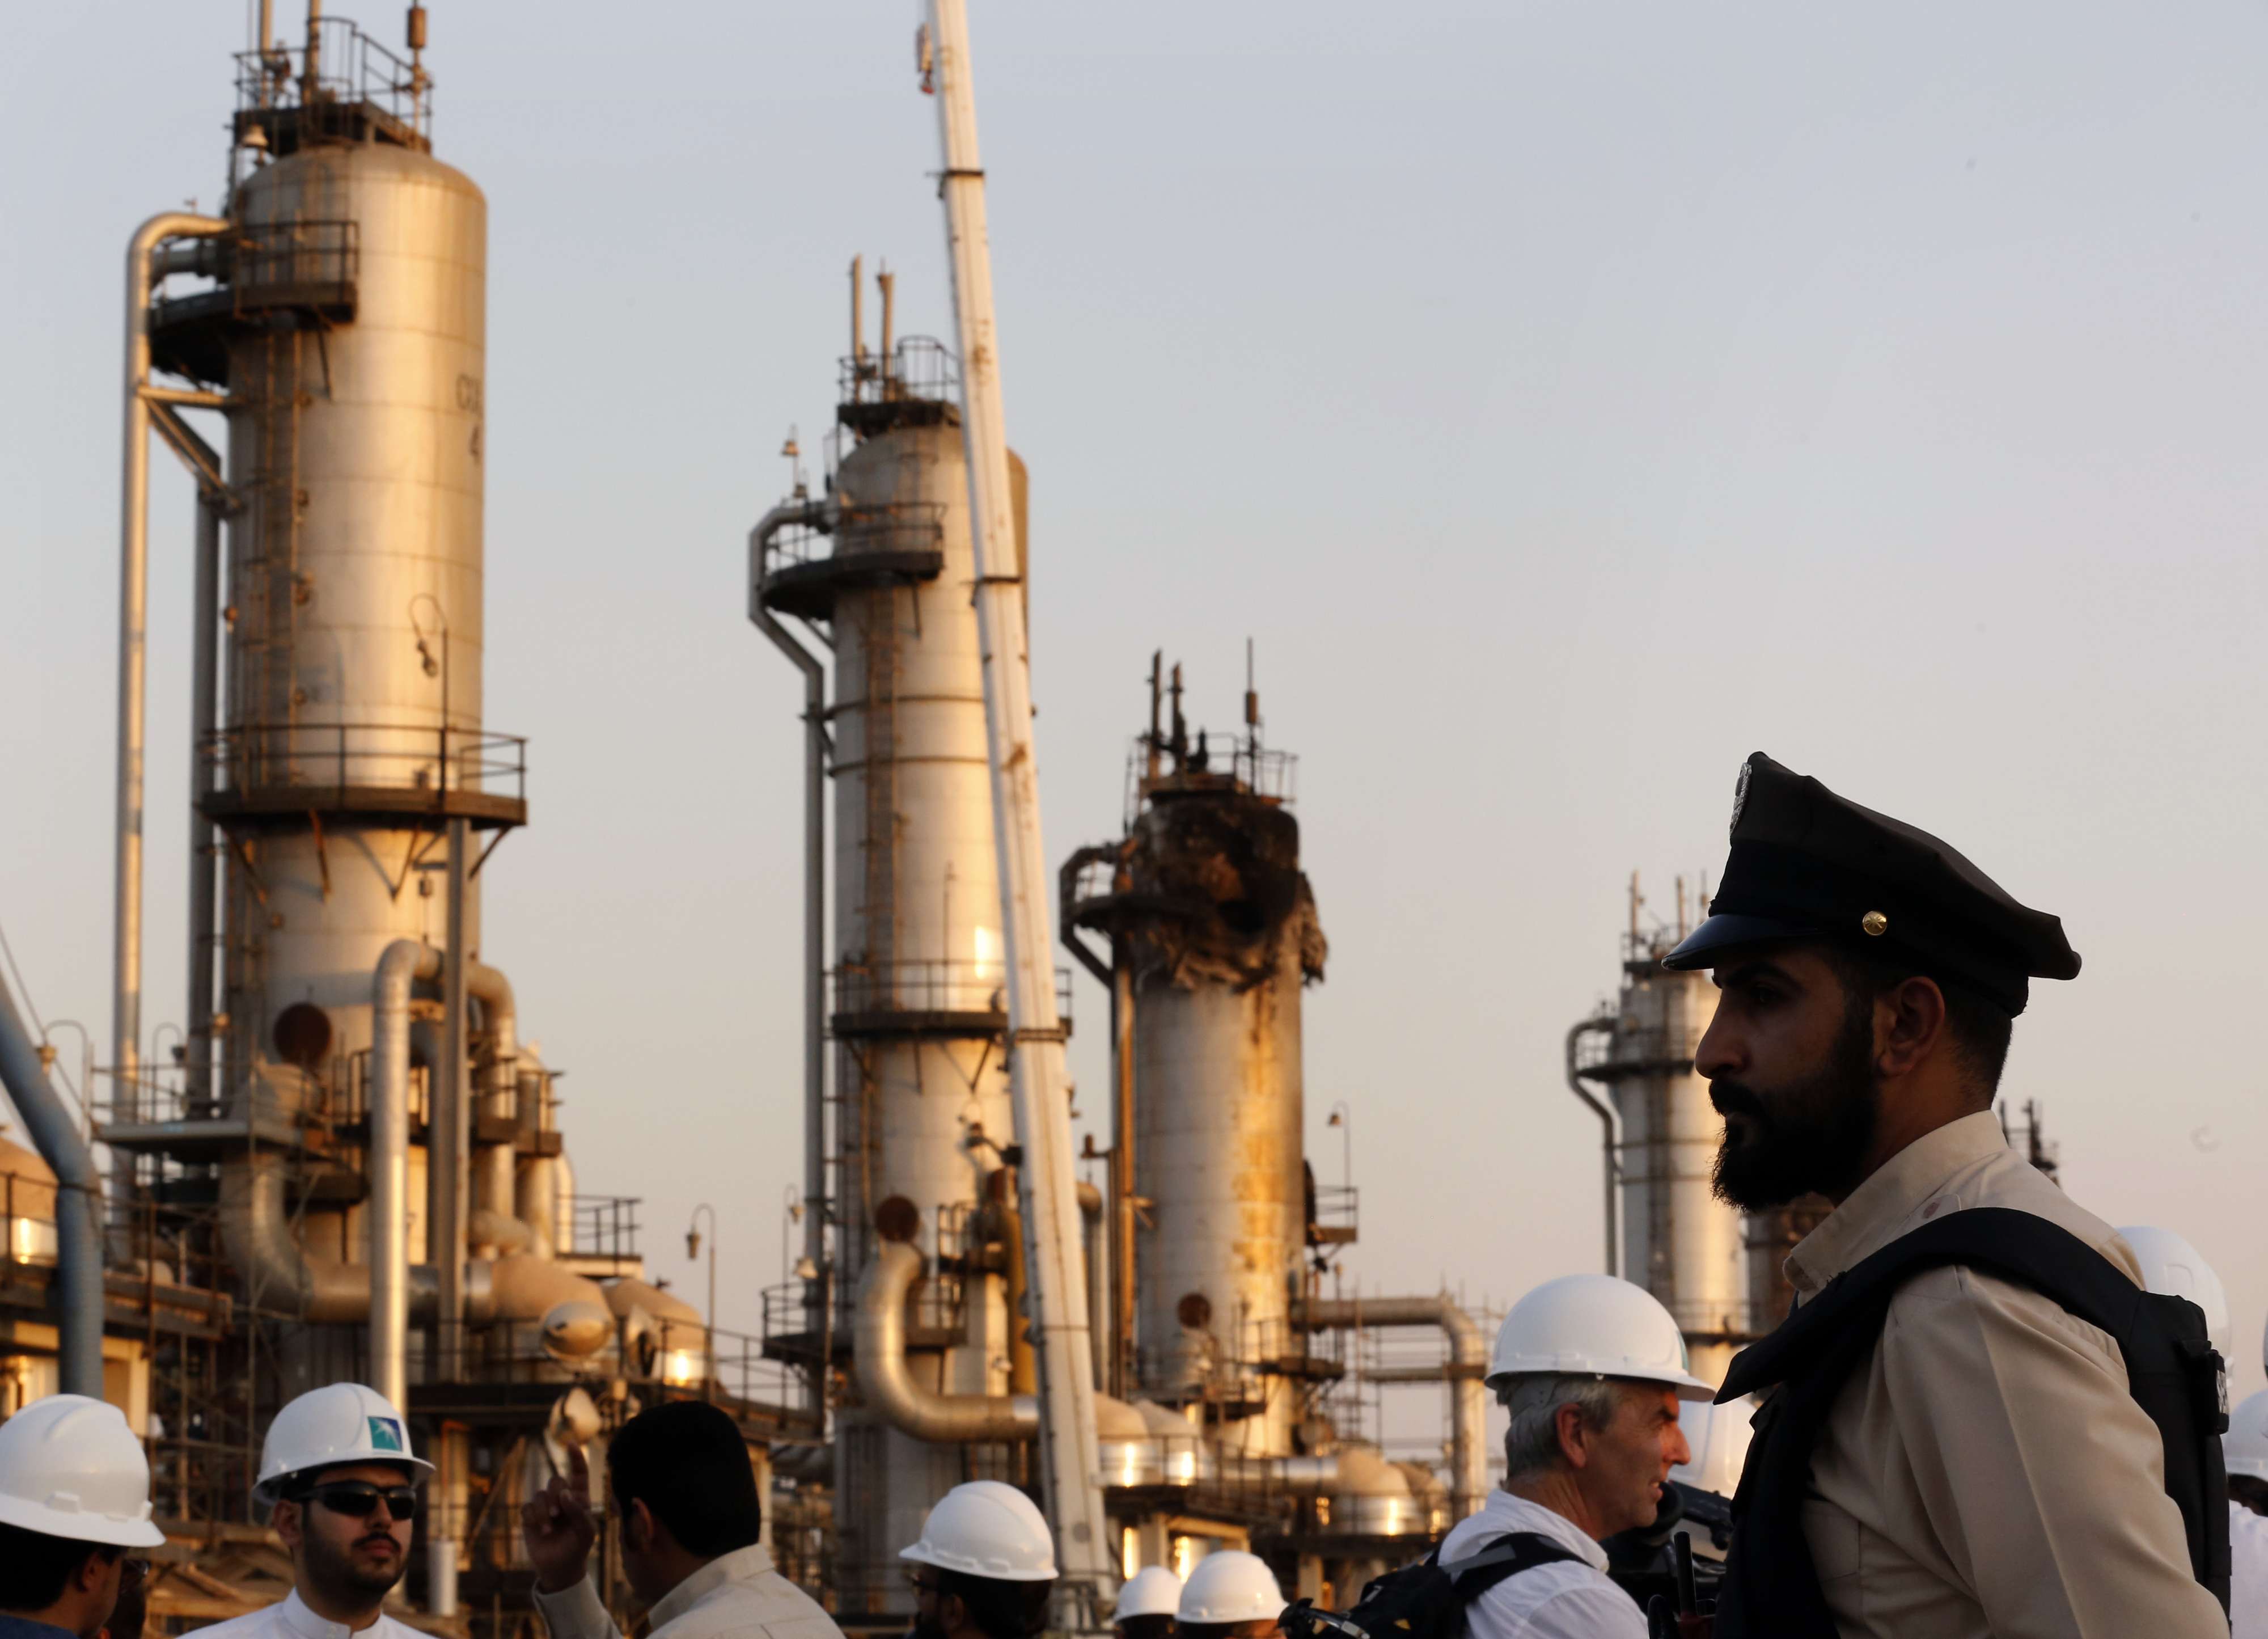 A security guard stands alert in front of Aramco's oil processing facility